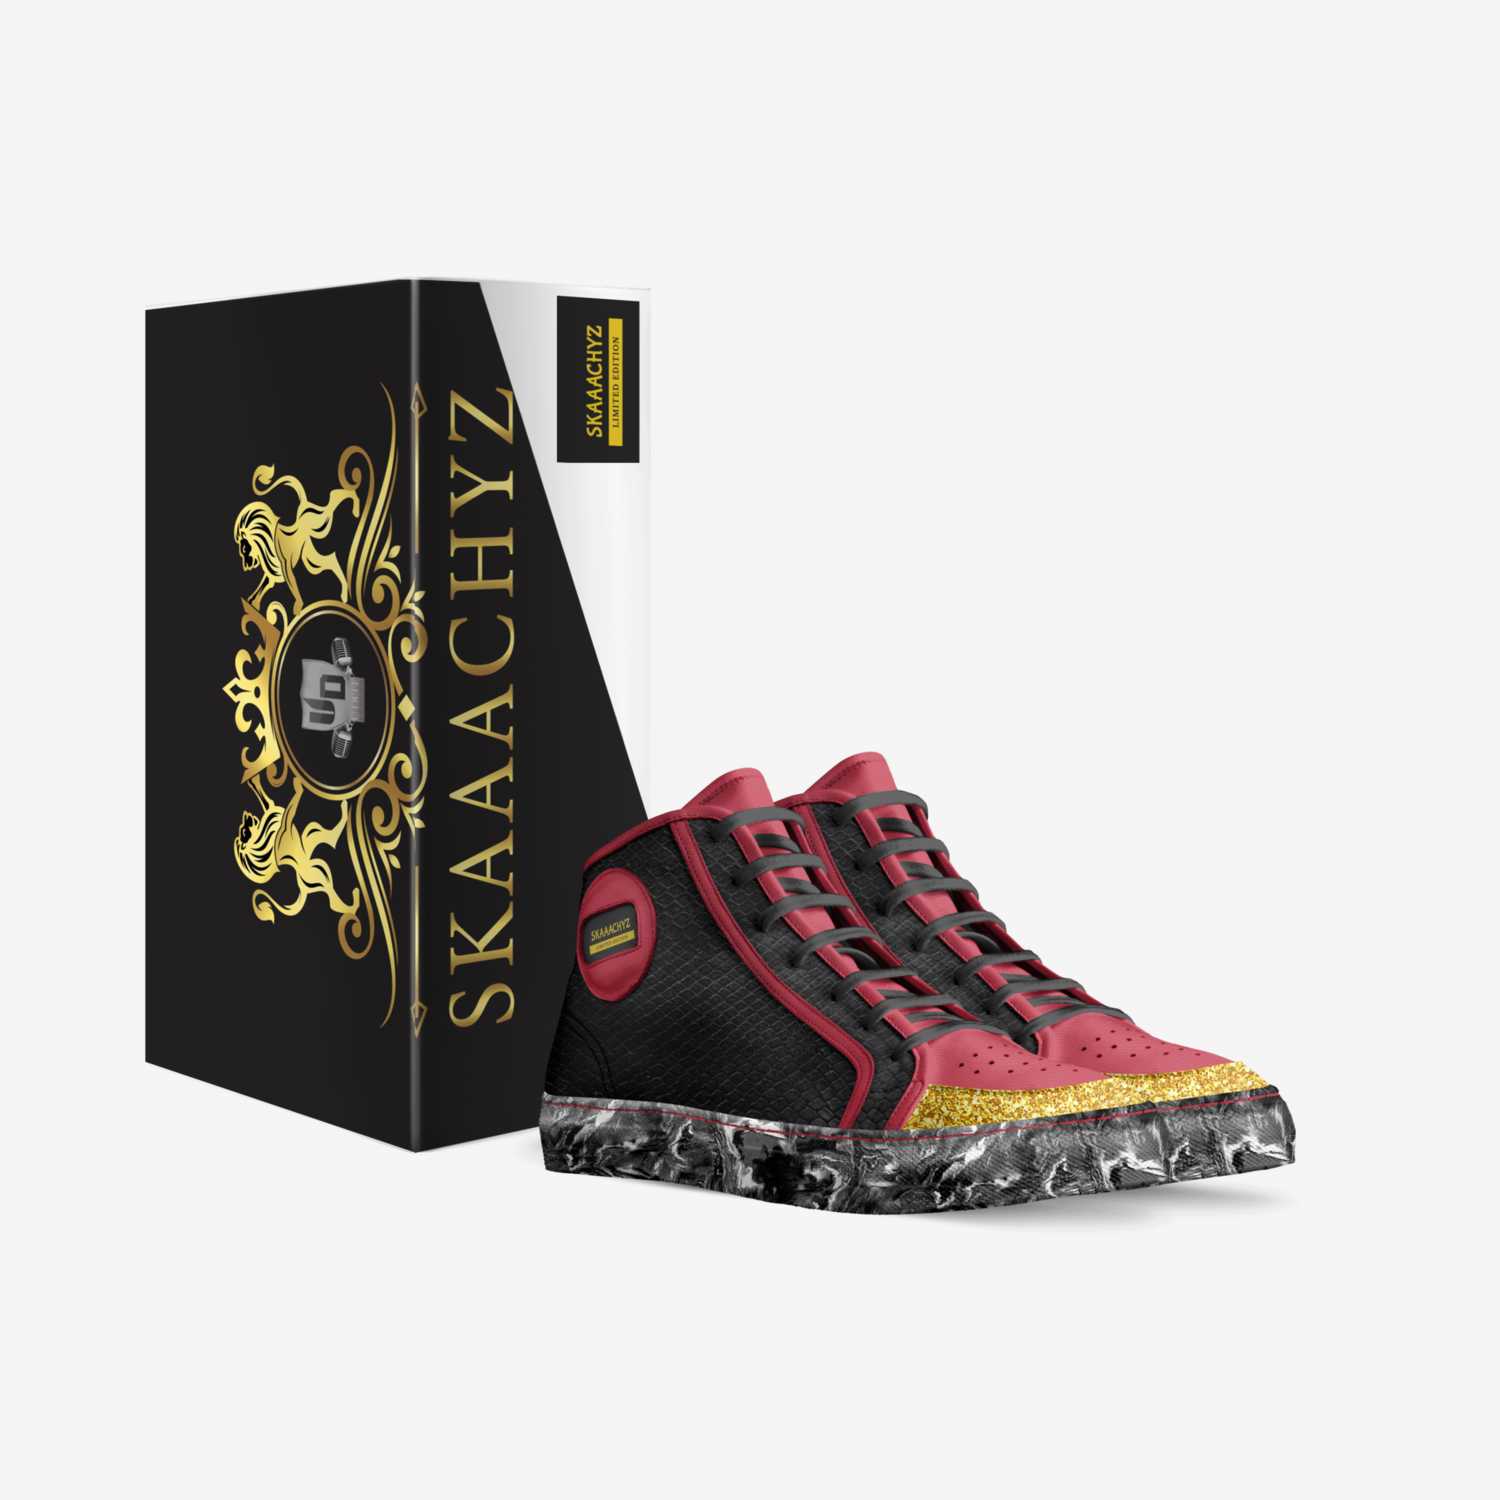 SKAAACHYZ custom made in Italy shoes by Terence Channer | Box view